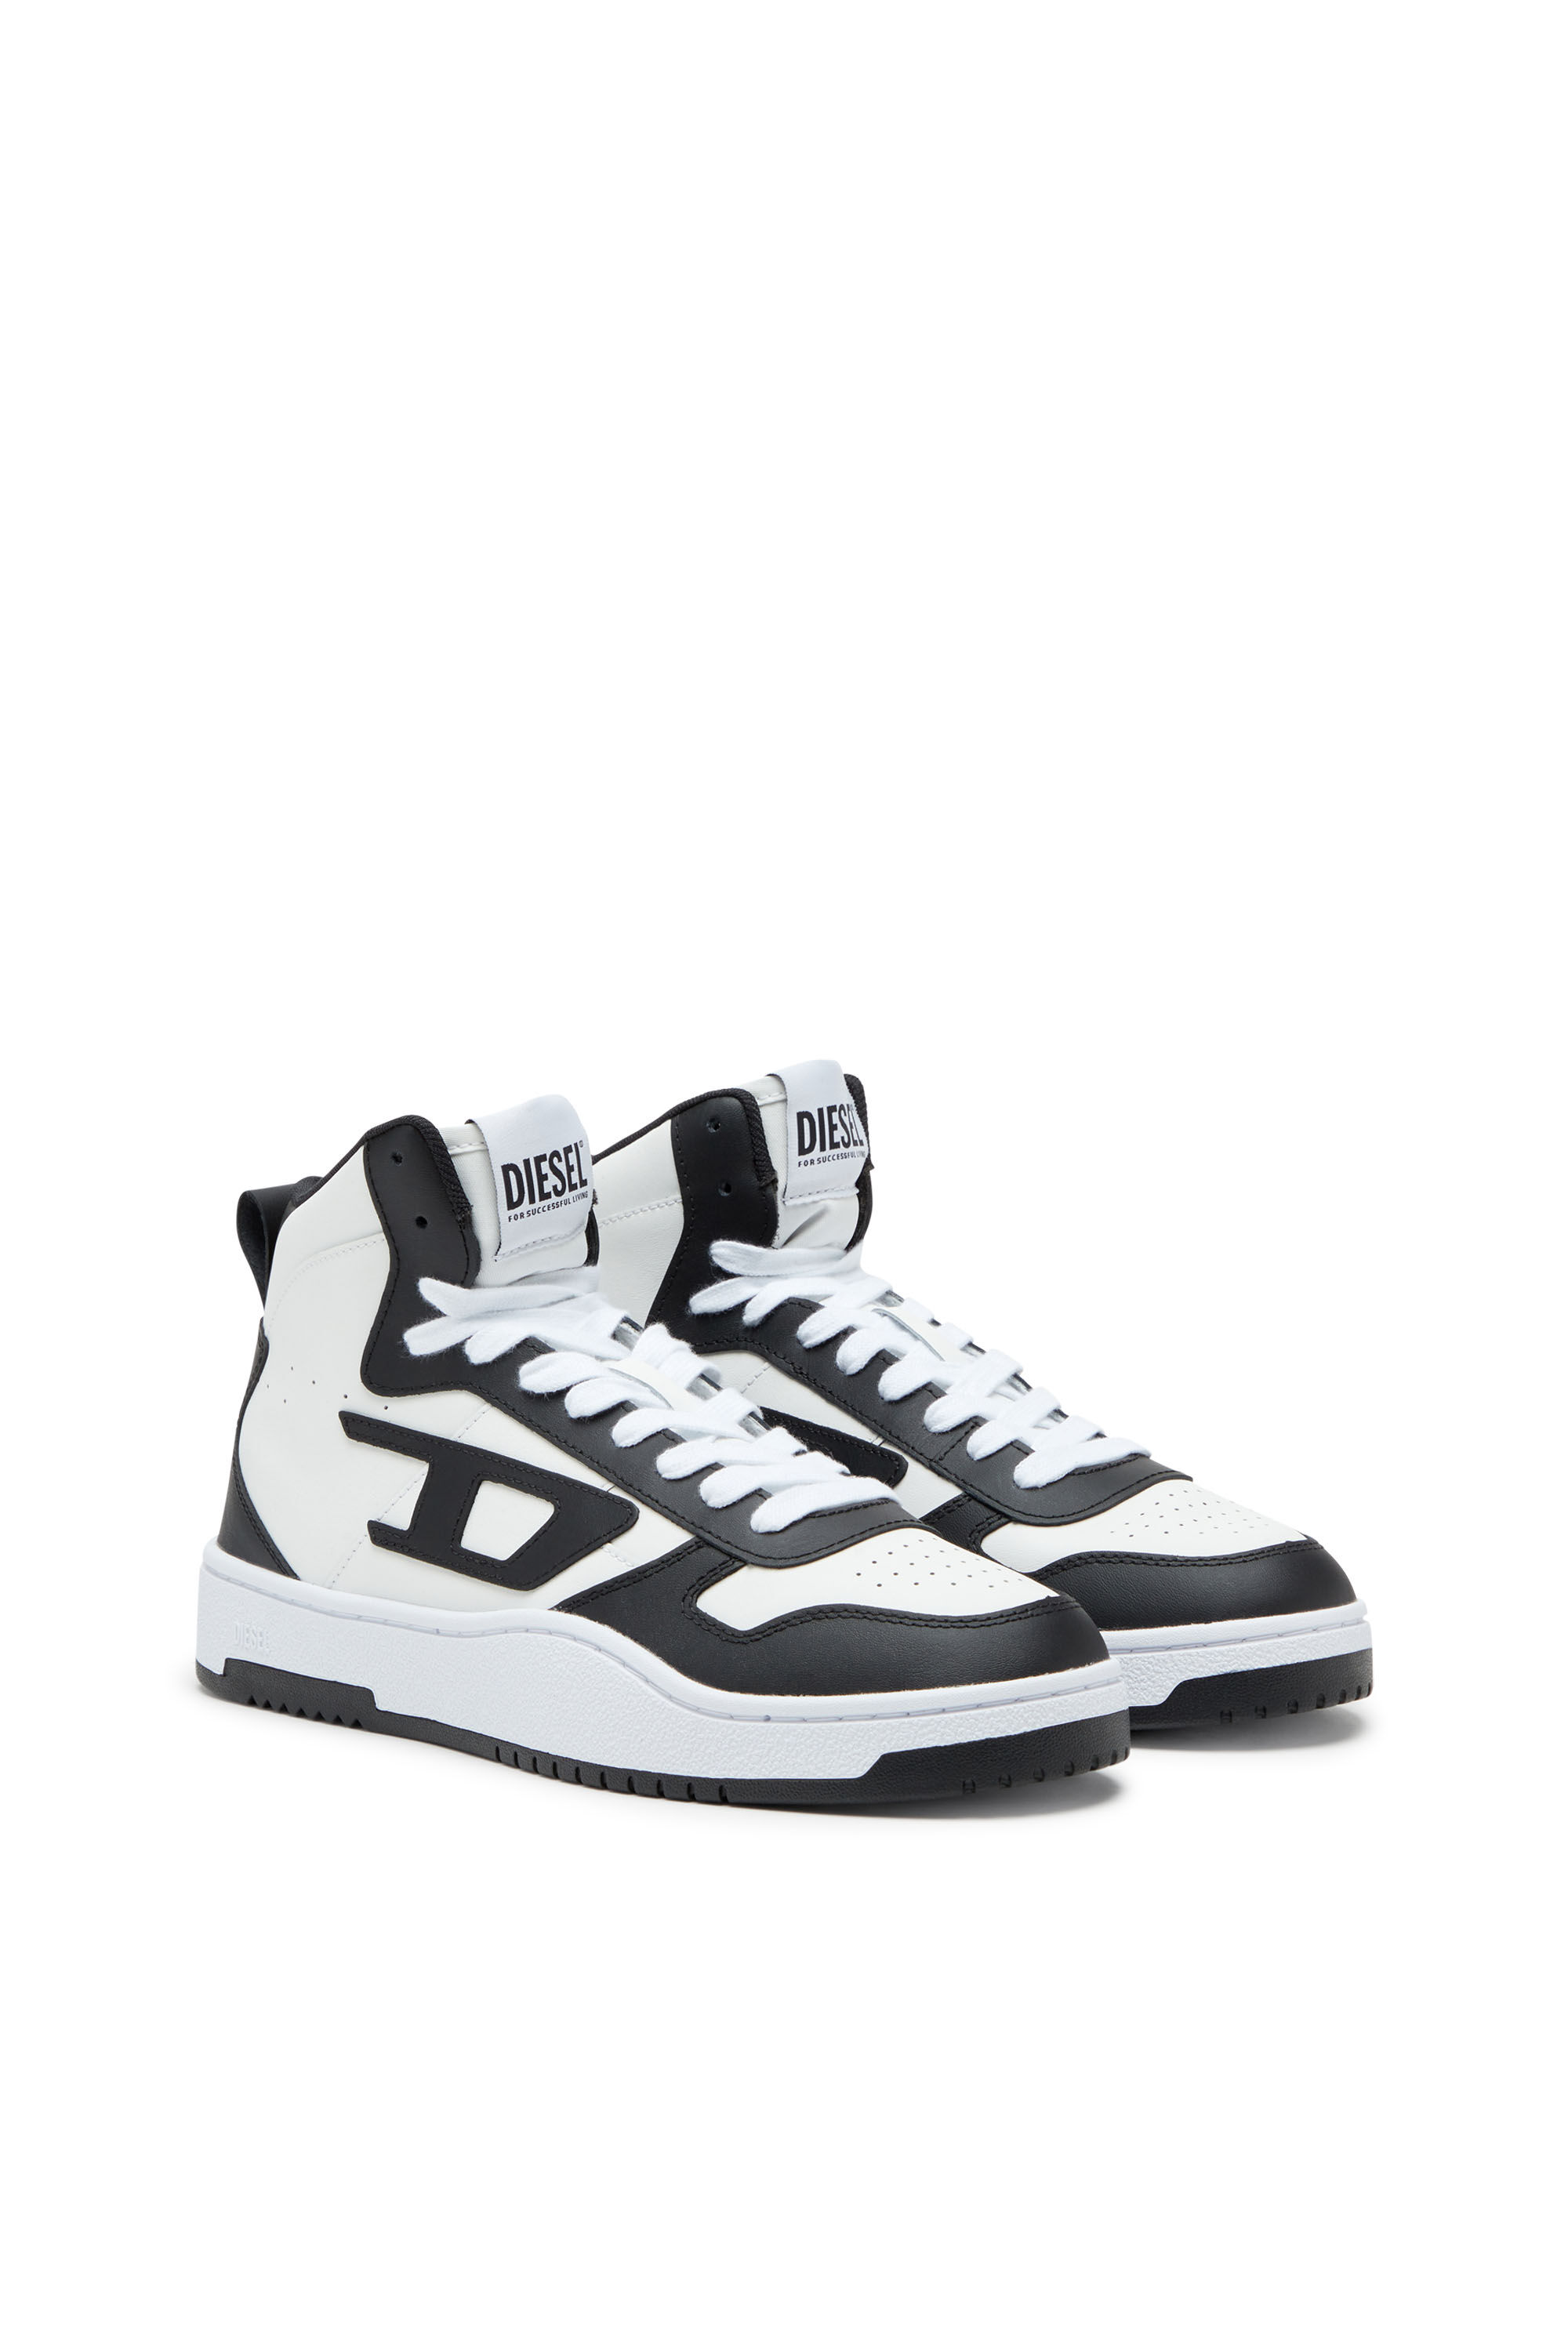 Men's S-Ukiyo V2 Mid - High-top sneakers in leather and nylon 